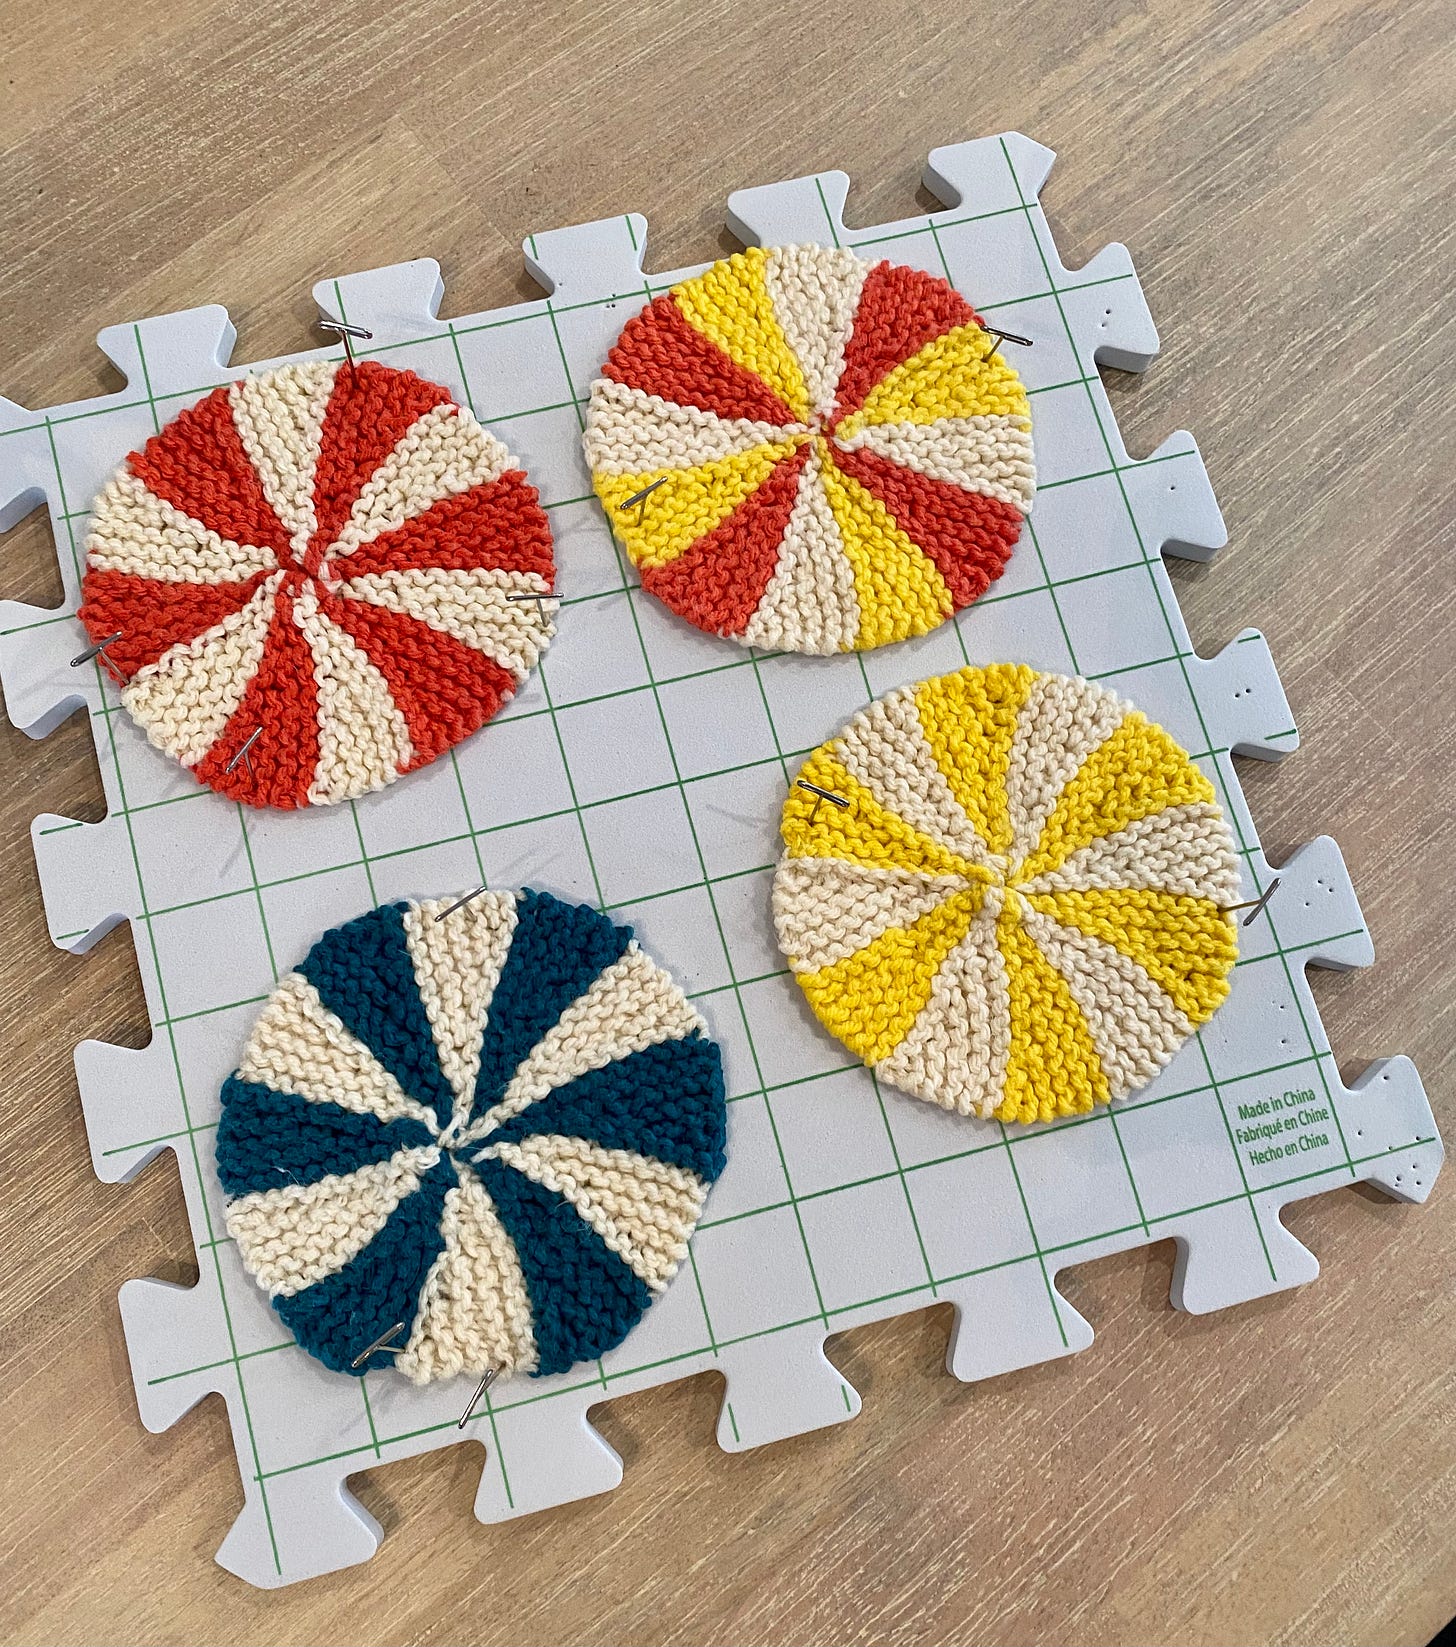 4 hand knit drink coasters on a knitting blocking mat